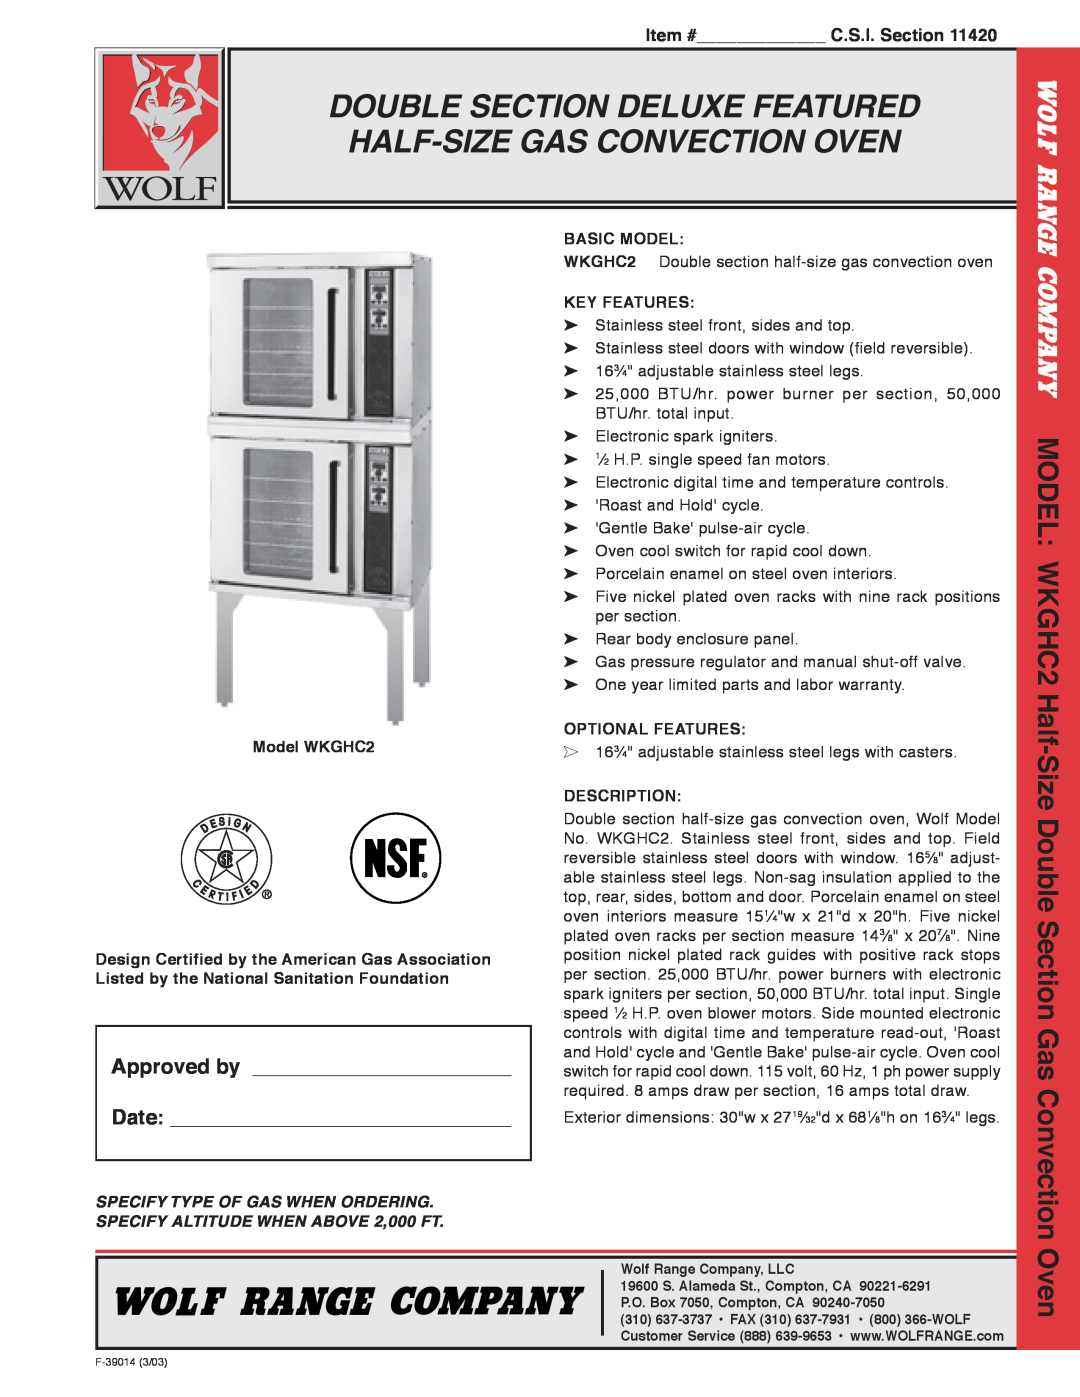 Wolf WKGHC2 warranty Item # C.S.I. Section, Double Section Deluxe Featured Half-Size Gas Convection Oven, Approved by Date 